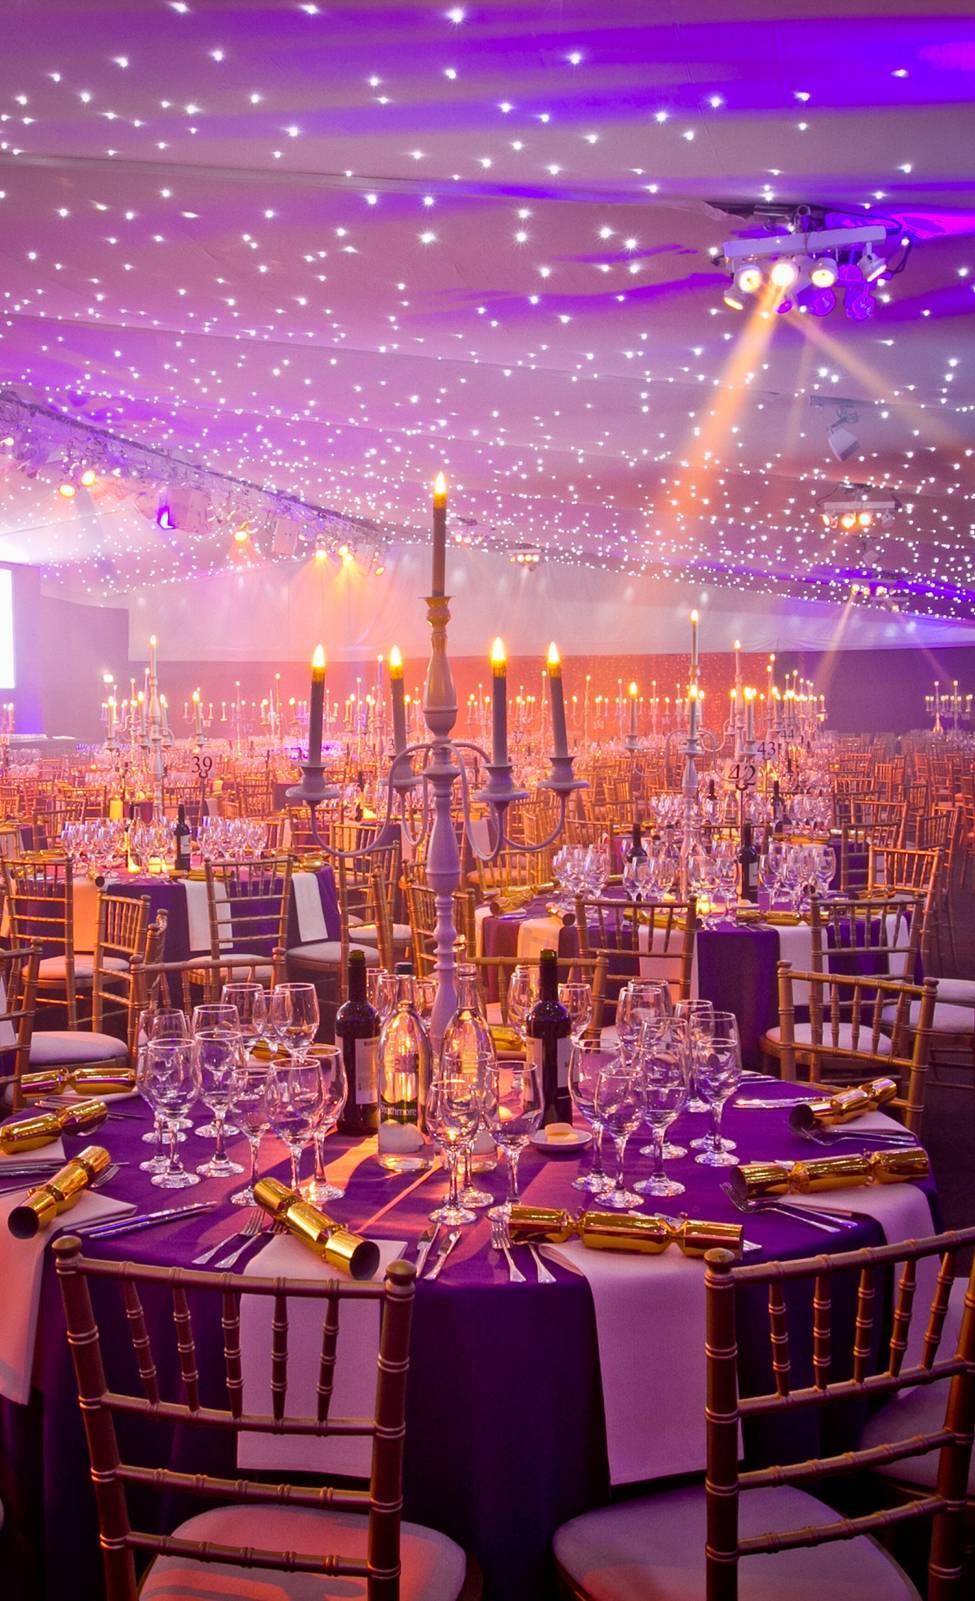 Purpose-built for events, The Pavilion is equipped with lighting and sound equipment as well as HD projectors, screens and a dance floor.